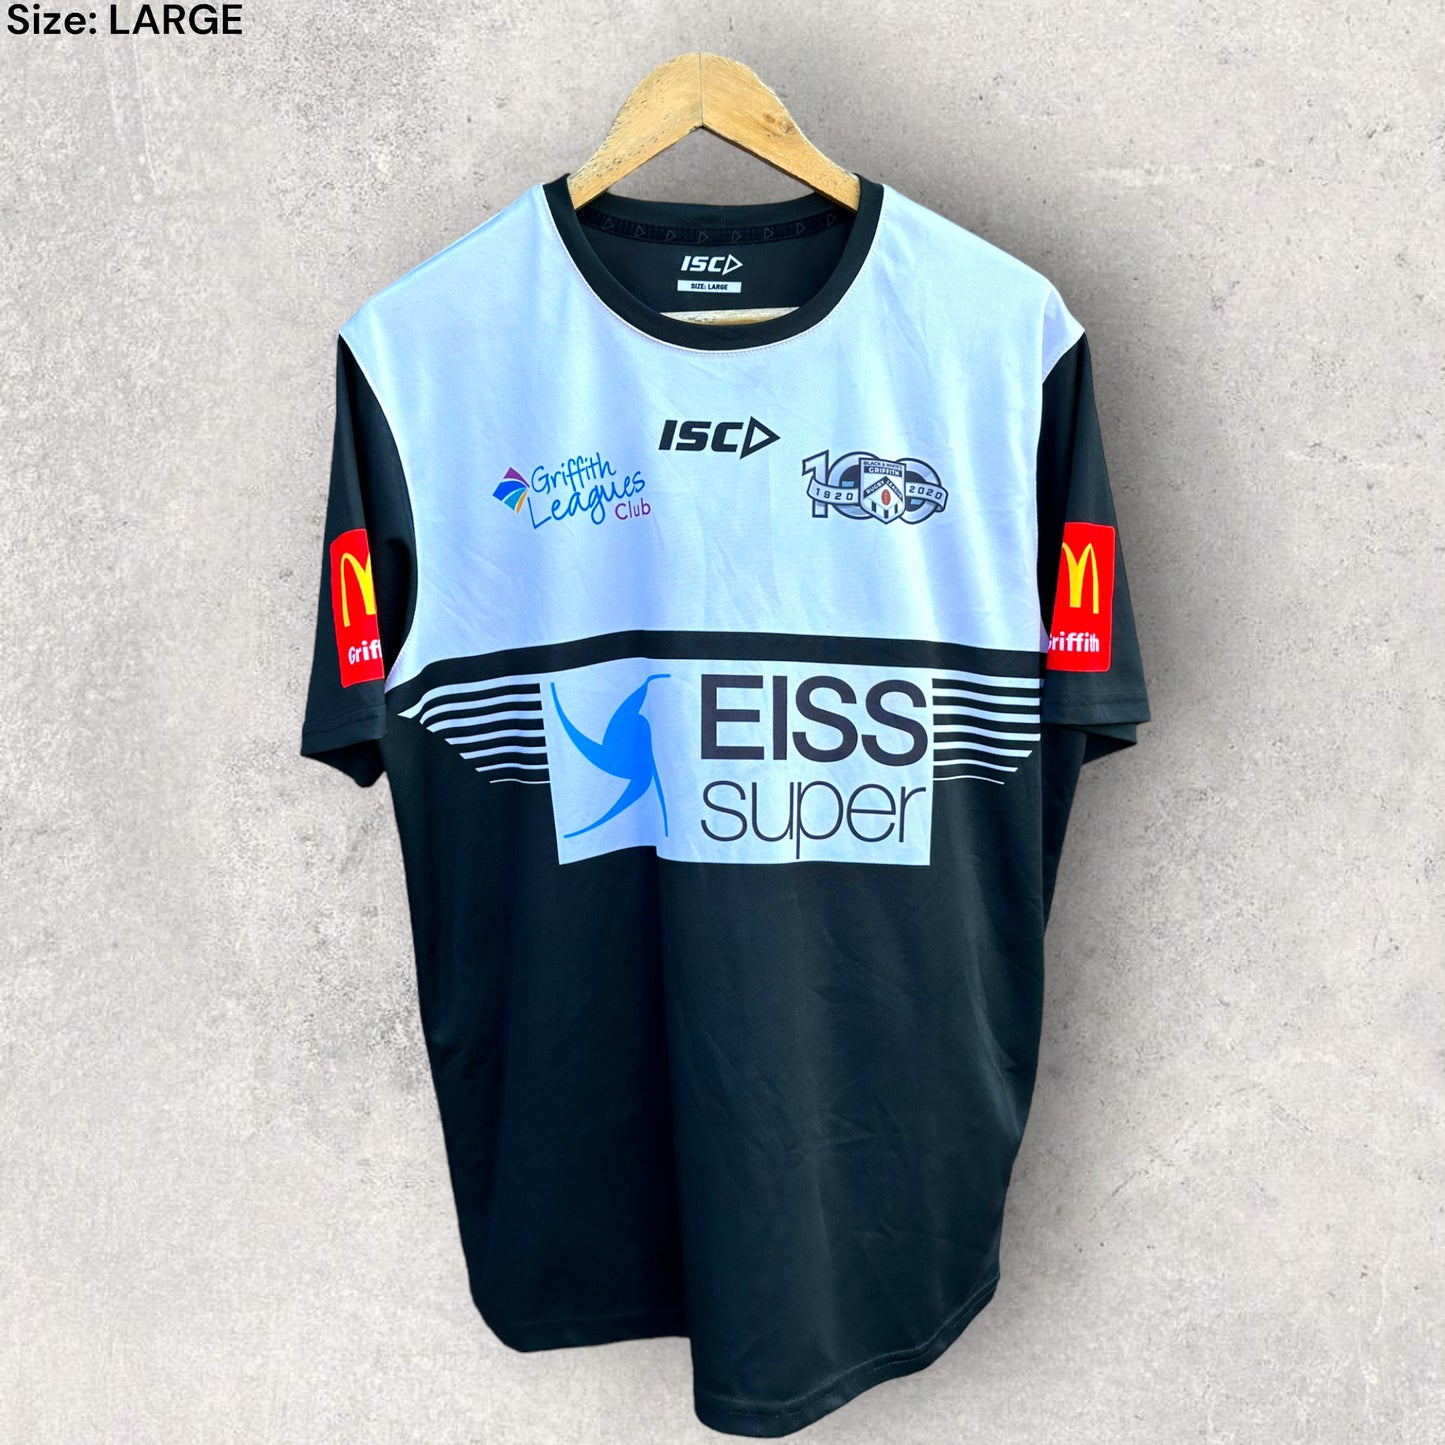 GRIFFITH BLACK & WHITES RUGBY LEAGUE TRAINING SHIRT